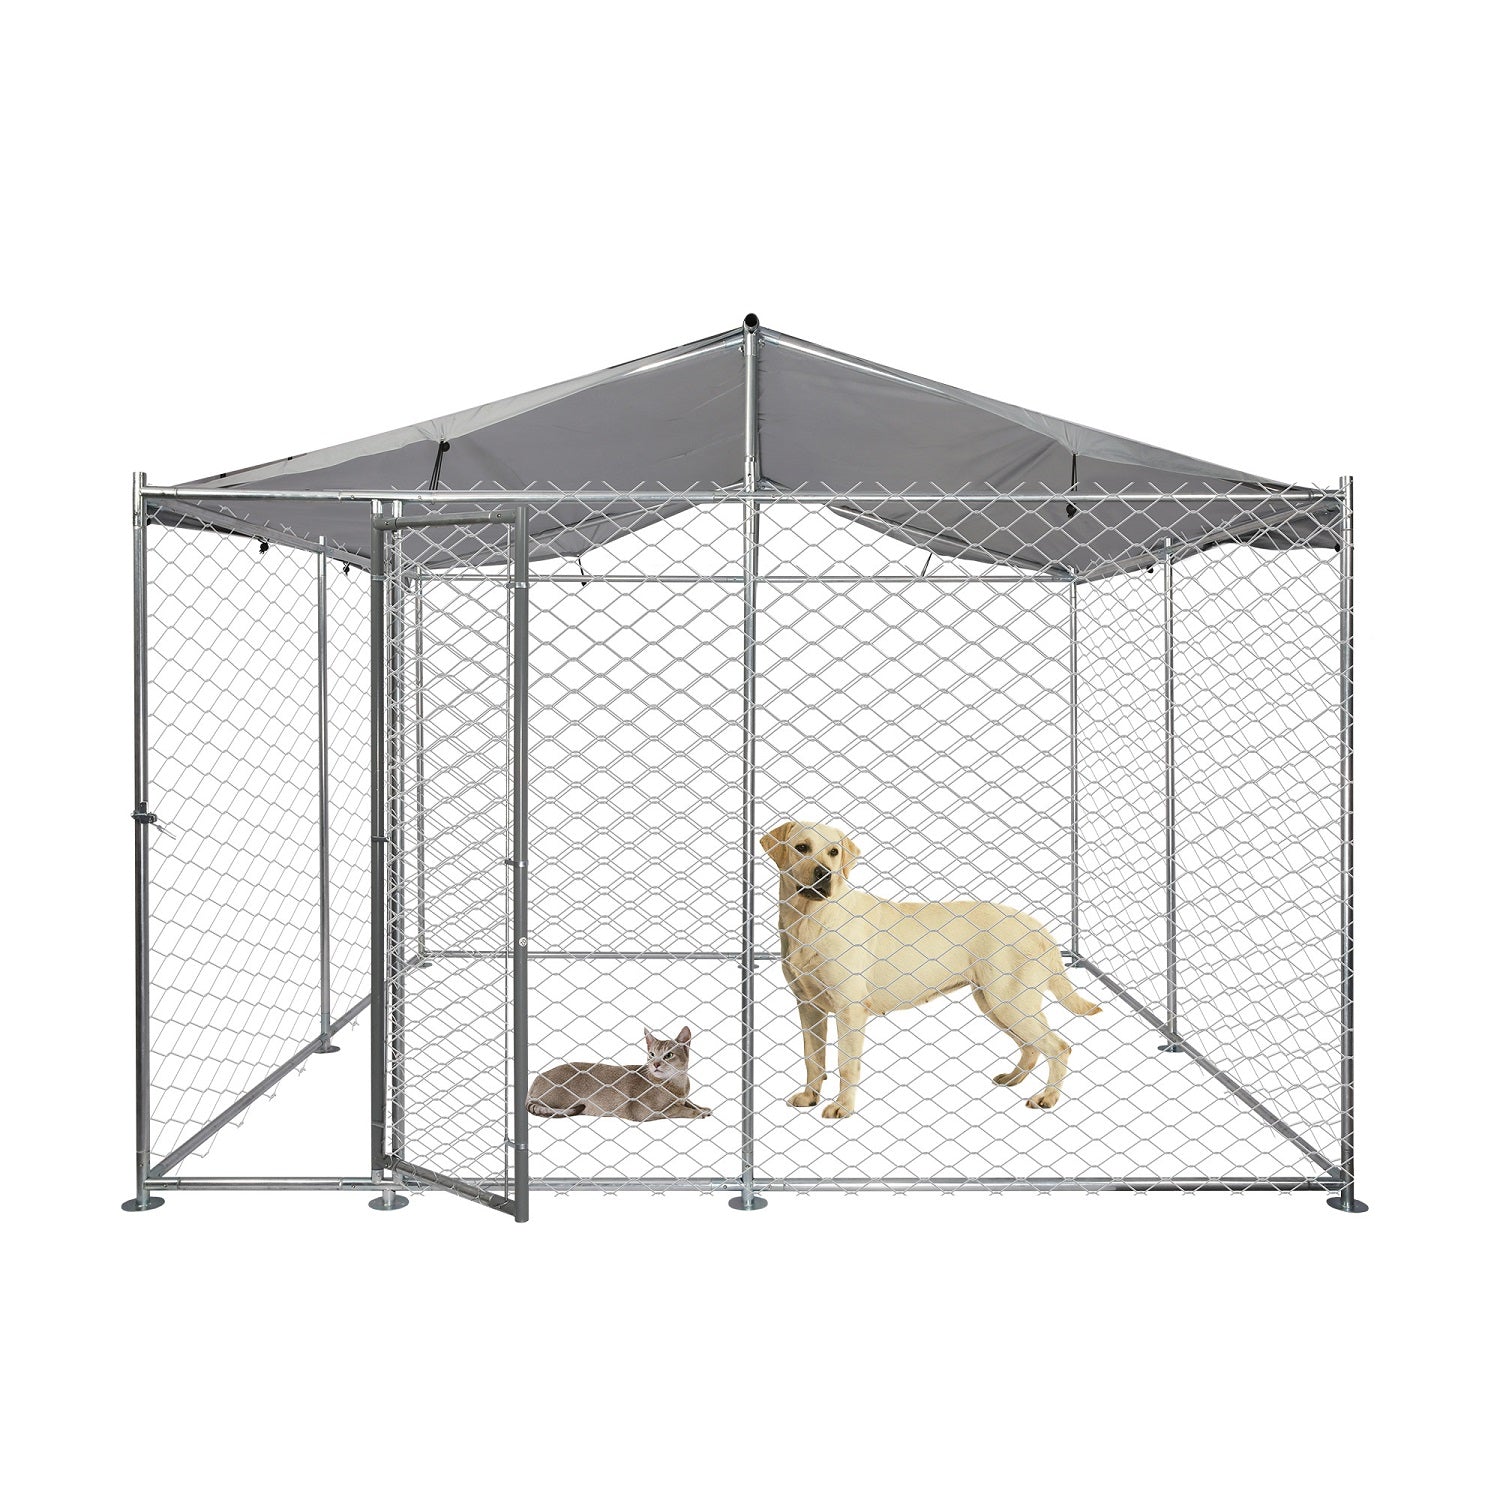 10' x 10' x 7.5' Outdoor Metal Dog Playpen For Your Puppy, Exercise Pens For Puppies, Chain Link Dog Kennel